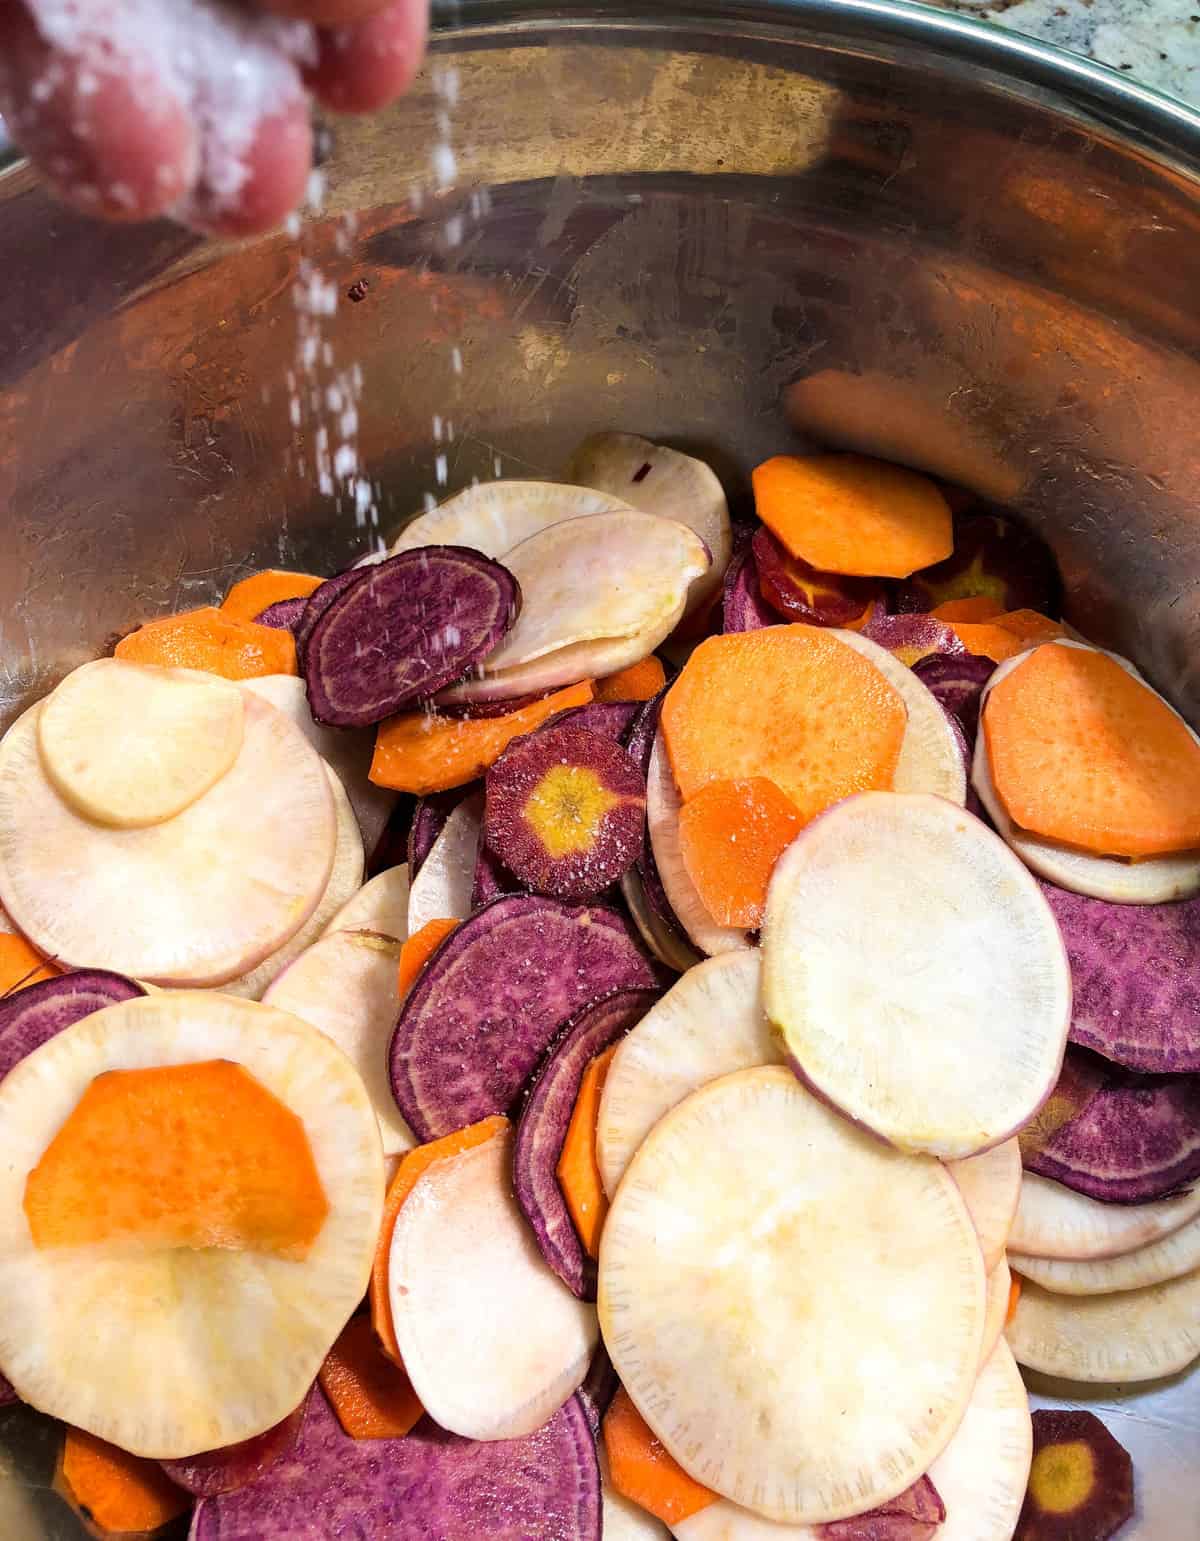 Dust carrots, beets, rutabagas, and sweet potatoes with salt